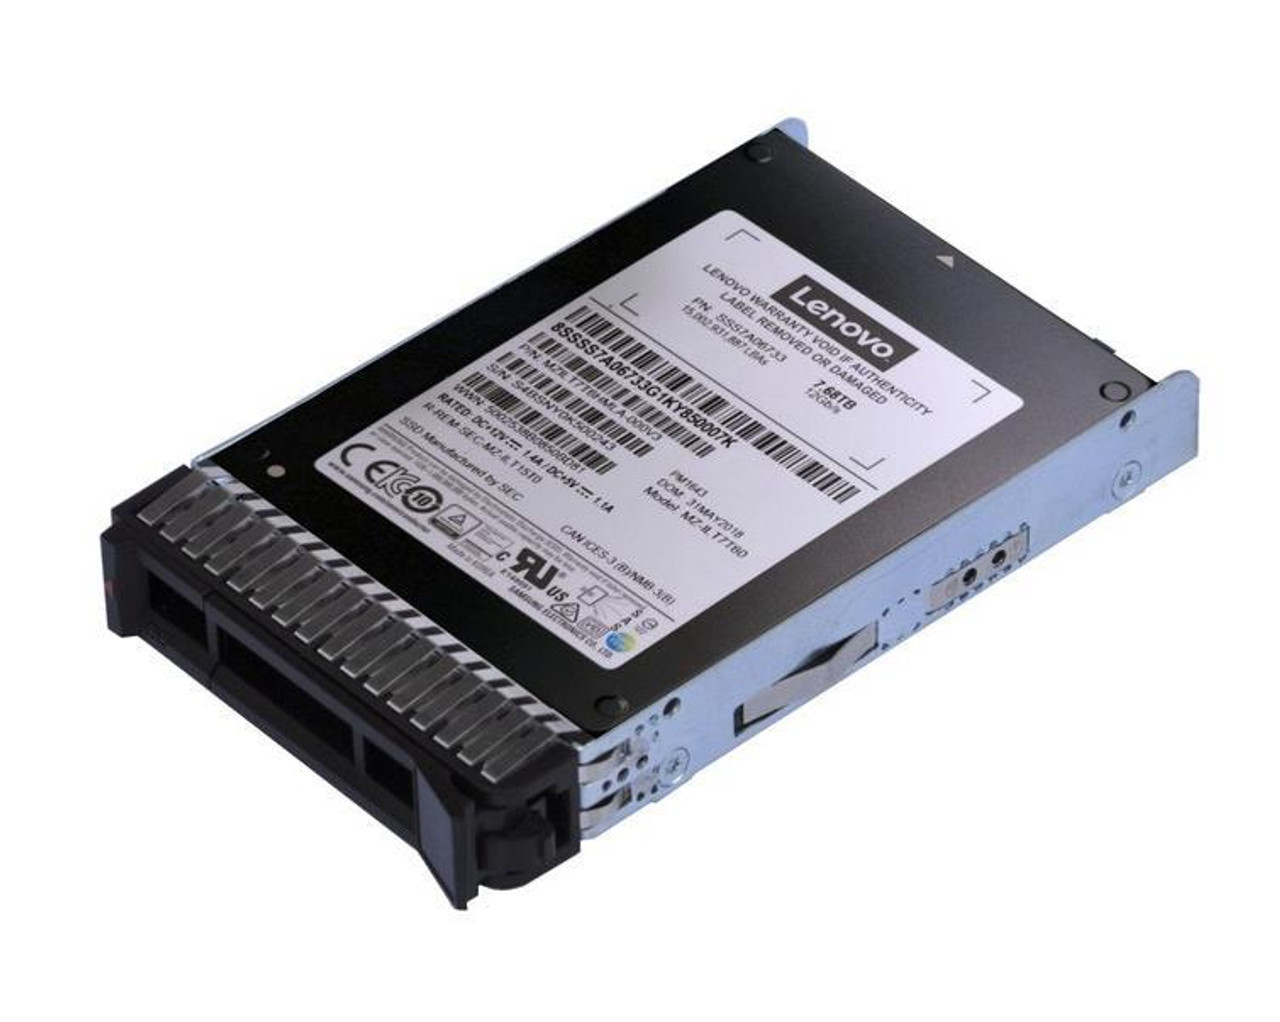 4XB7A17080 Lenovo 7.68TB SATA 6Gbps Hot Swap 2.5-inch Internal Solid State Drive (SSD) ( Refurbished )